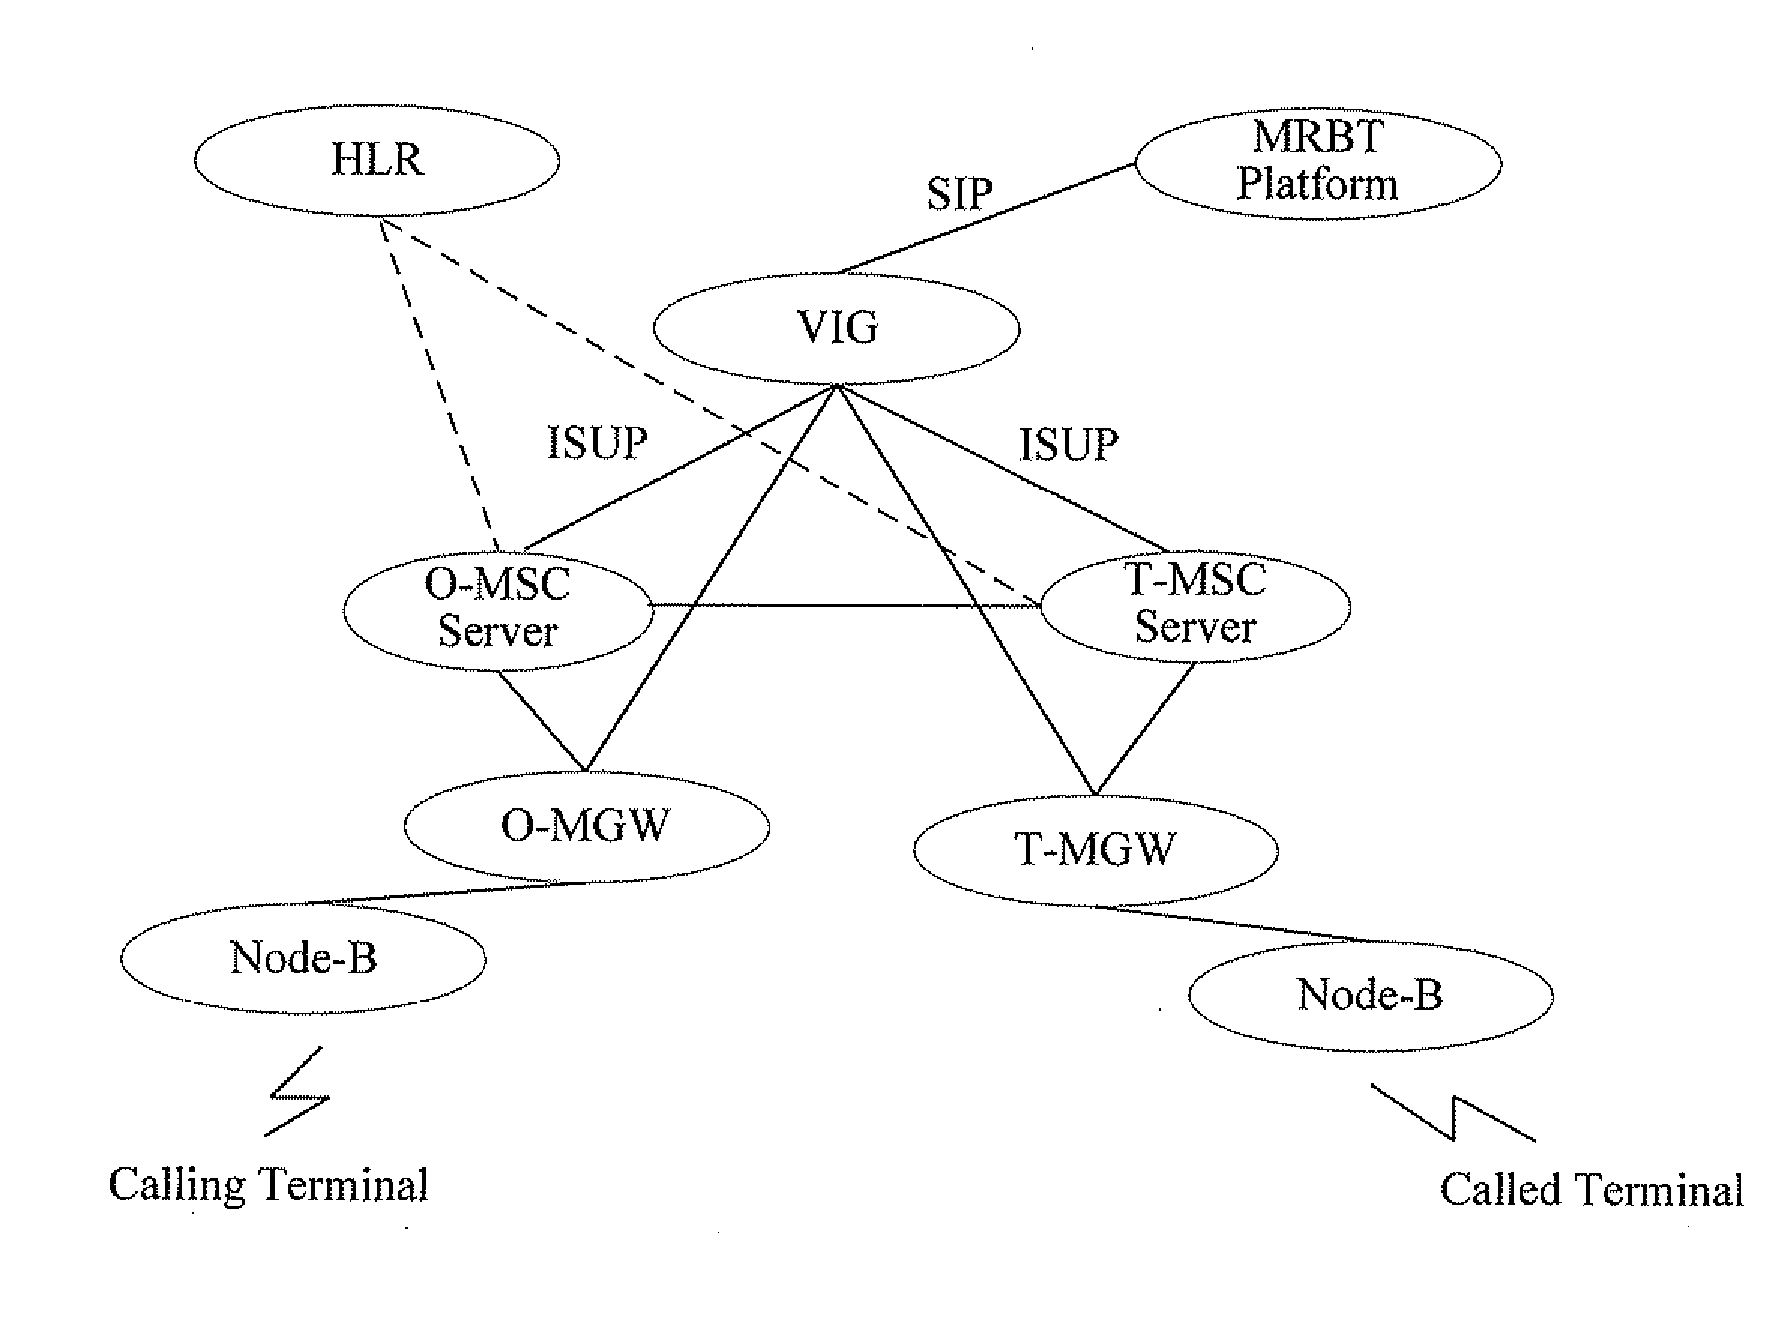 System and Method for Implementing Multimedia Ring Back Tone Service